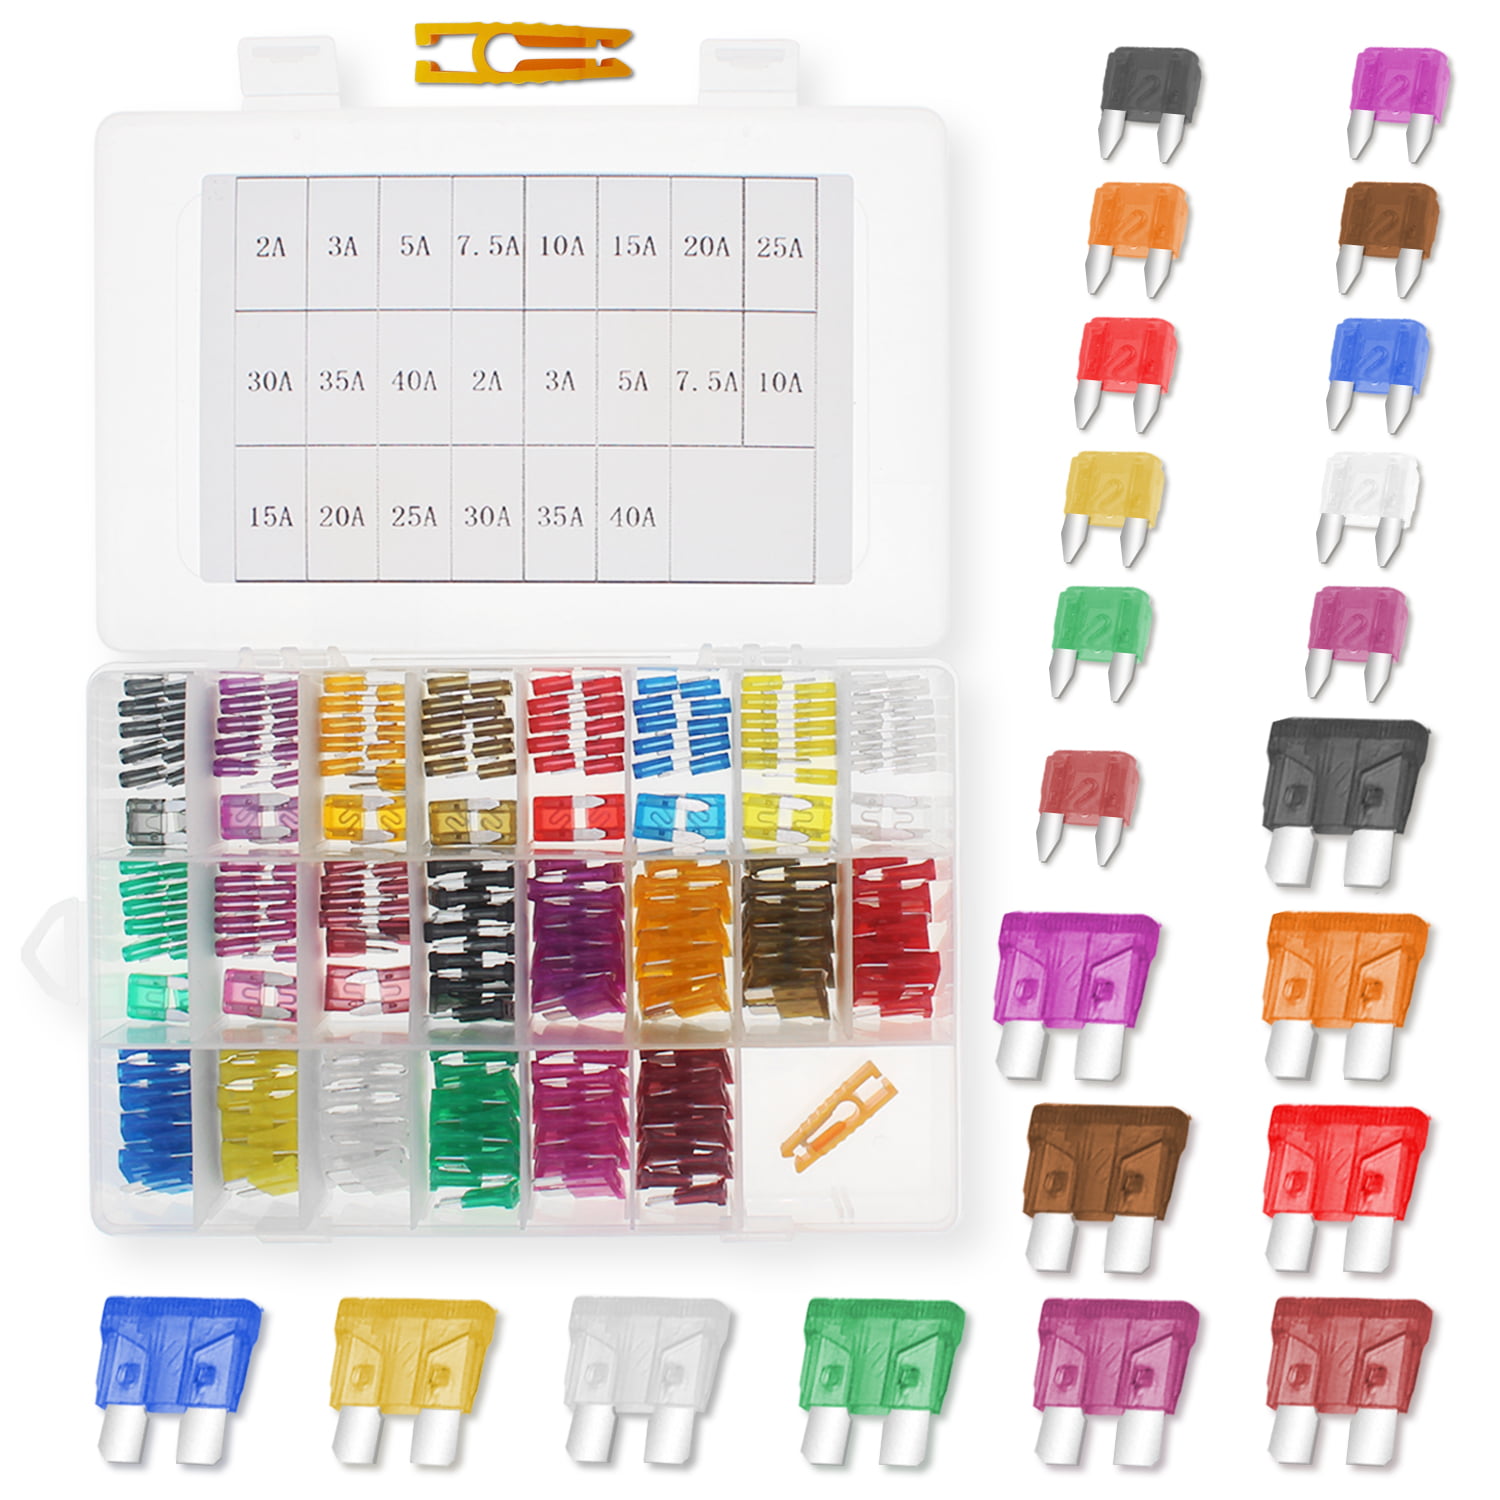 35x Auto Car Micro II 2 Blade Fuse Kit Assortment for Ford Dodge Fuses 5-30A Kit 